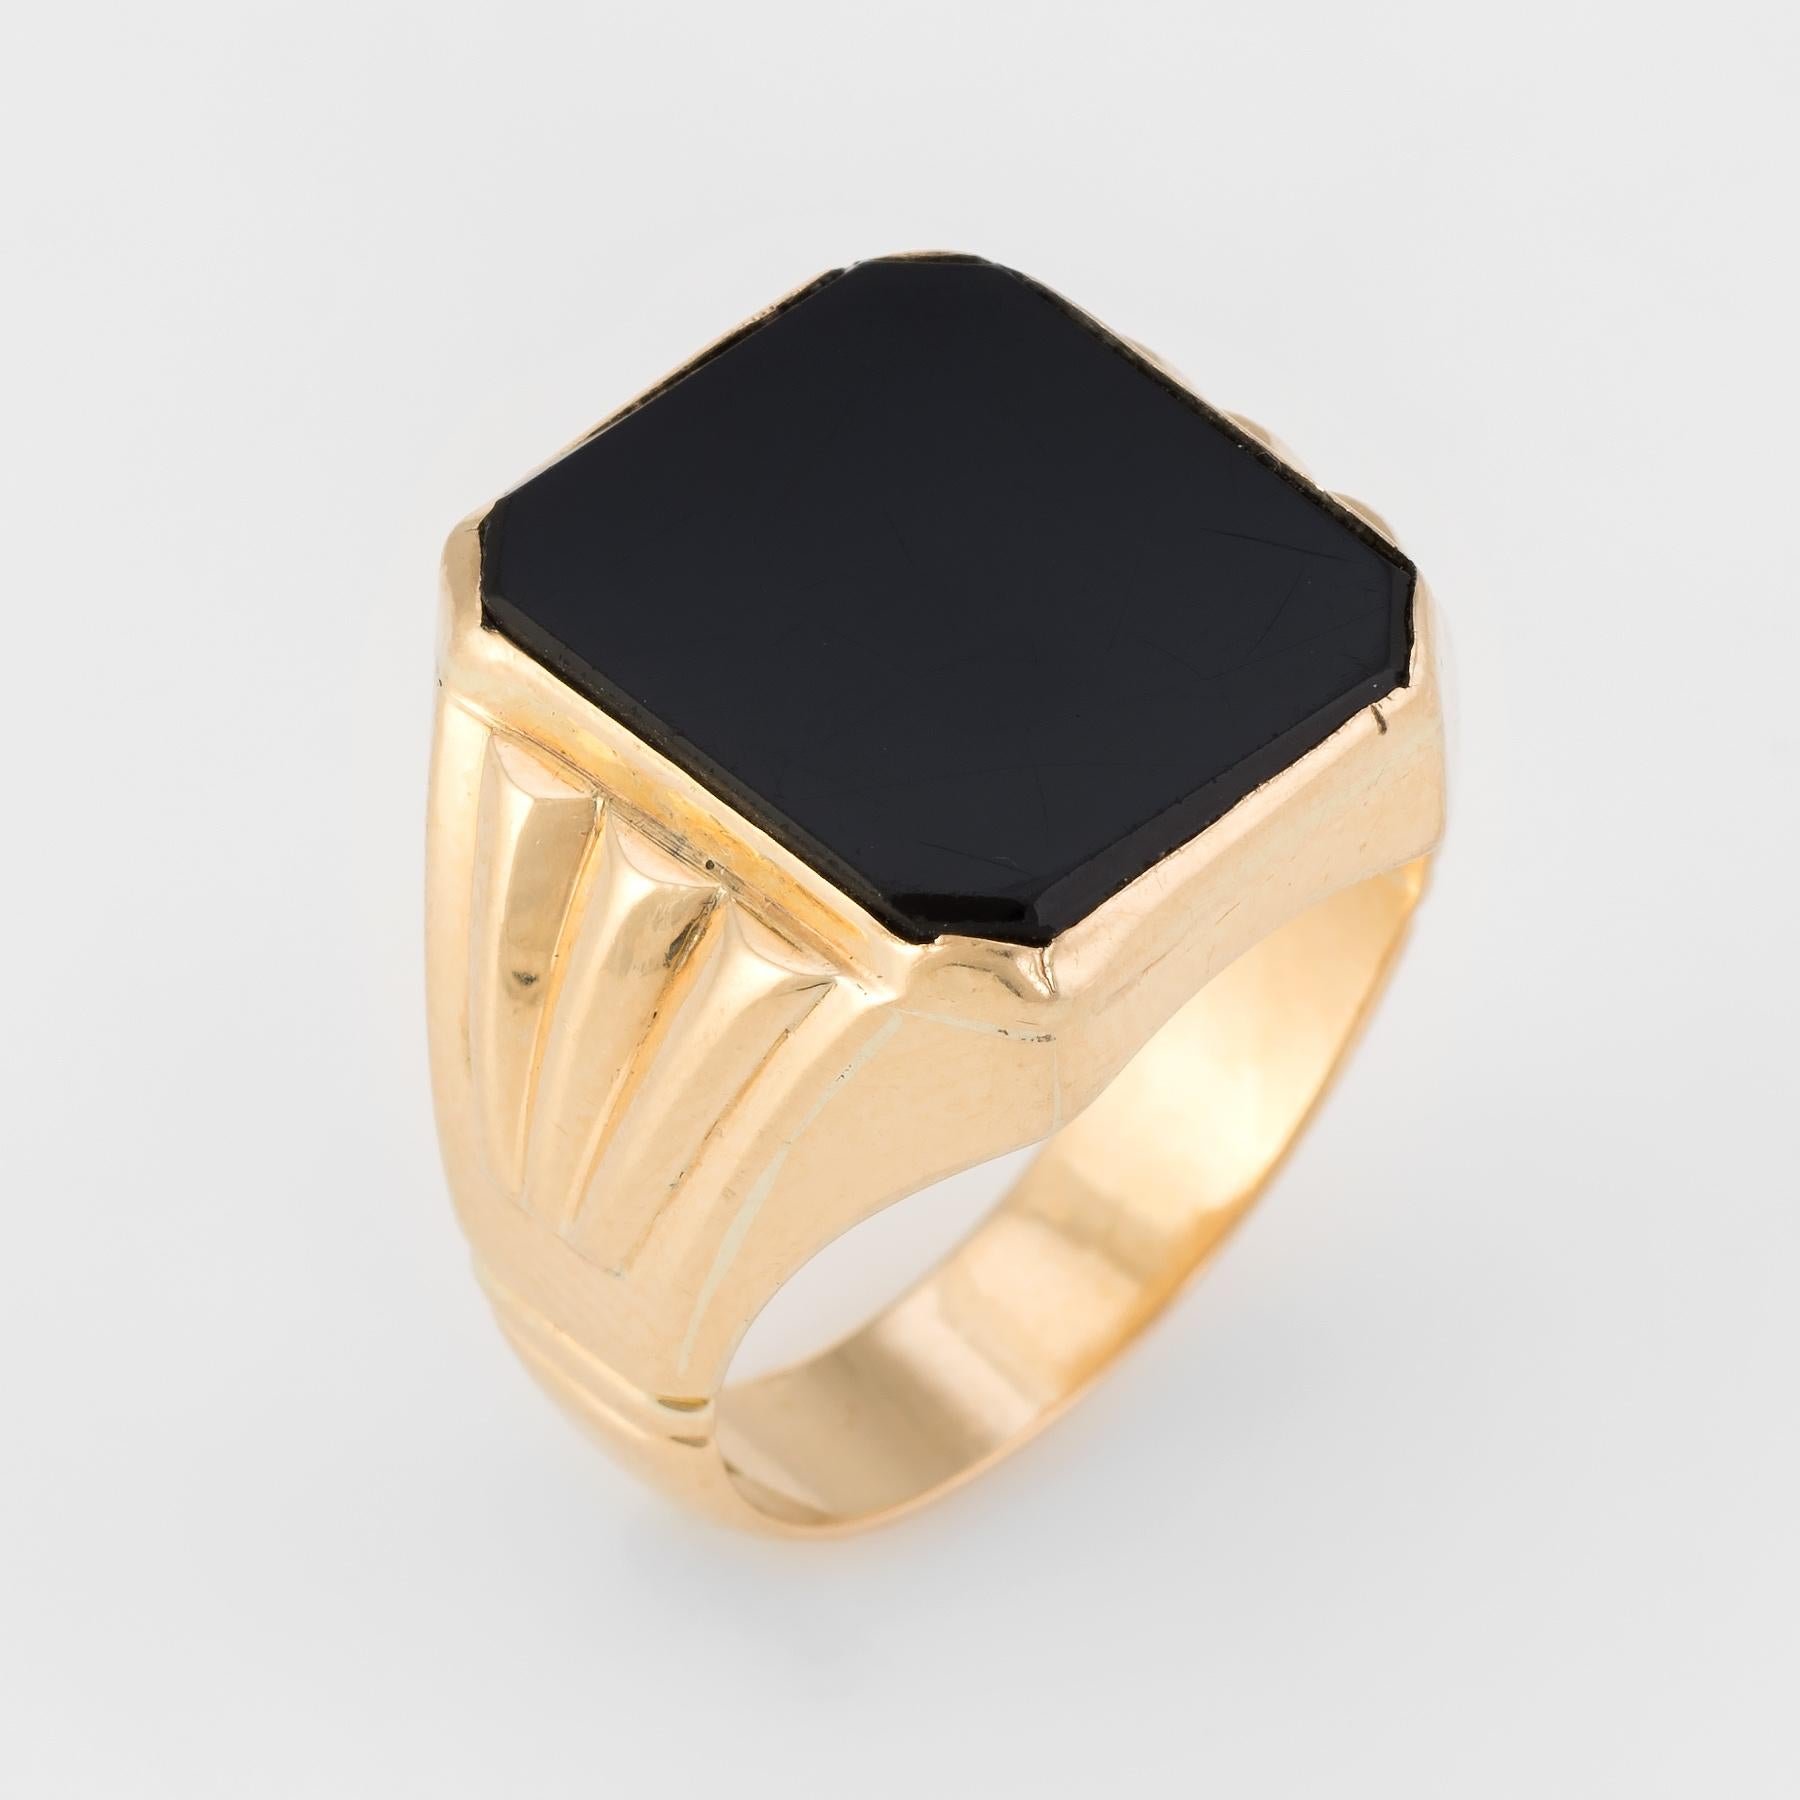 Finely detailed men's cocktail ring (circa 1960s to 1970s), crafted in 18 karat yellow gold. 

Onyx is inlaid flush into the mount and measures 15mm x 13mm. The onyx is in excellent condition and free of cracks or chips. Few light surface abrasions